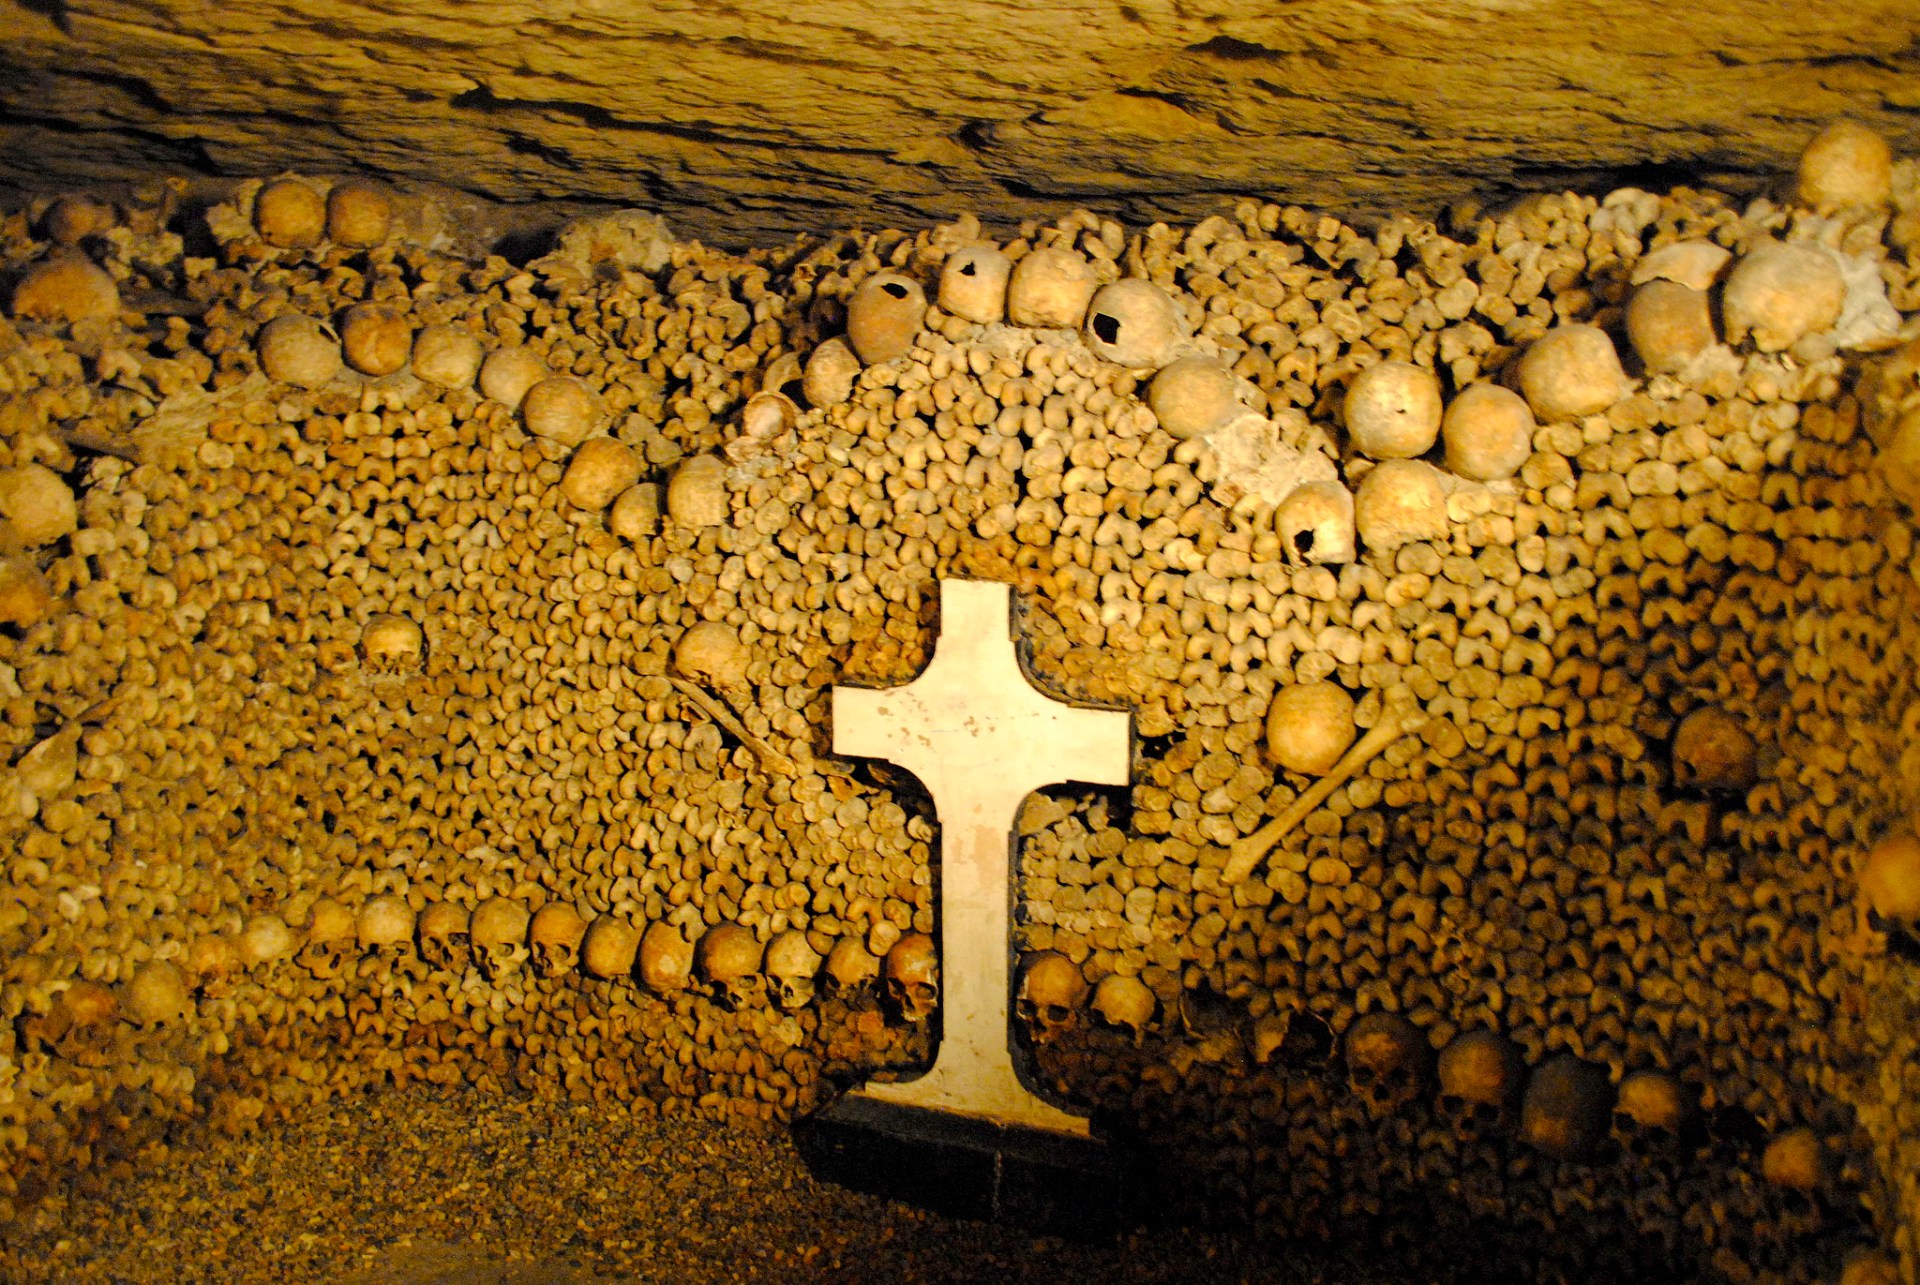 After 8 centuries, this place is filled with thousands of years old skeletons.